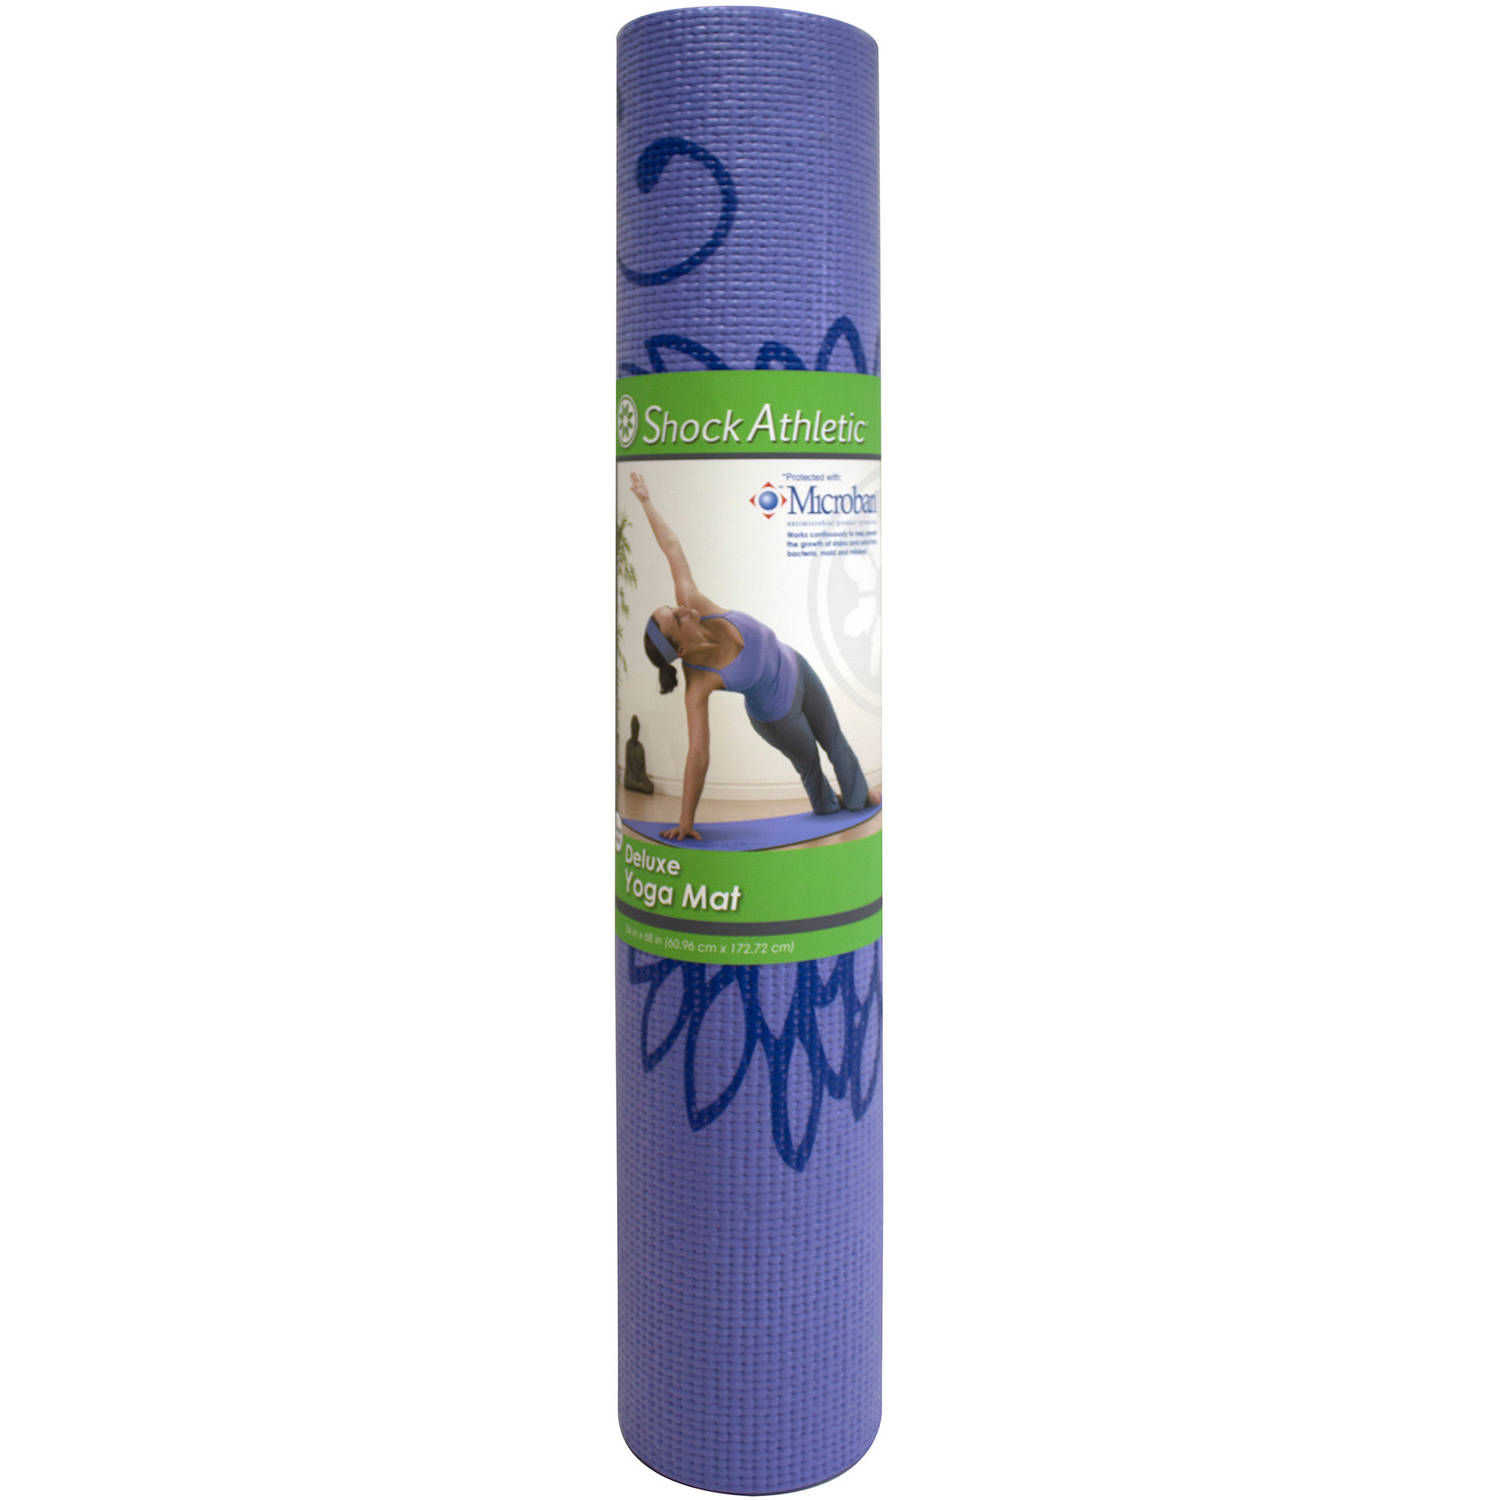 Venture Products 6mm Silk-Screened Yoga Mat - image 1 of 2